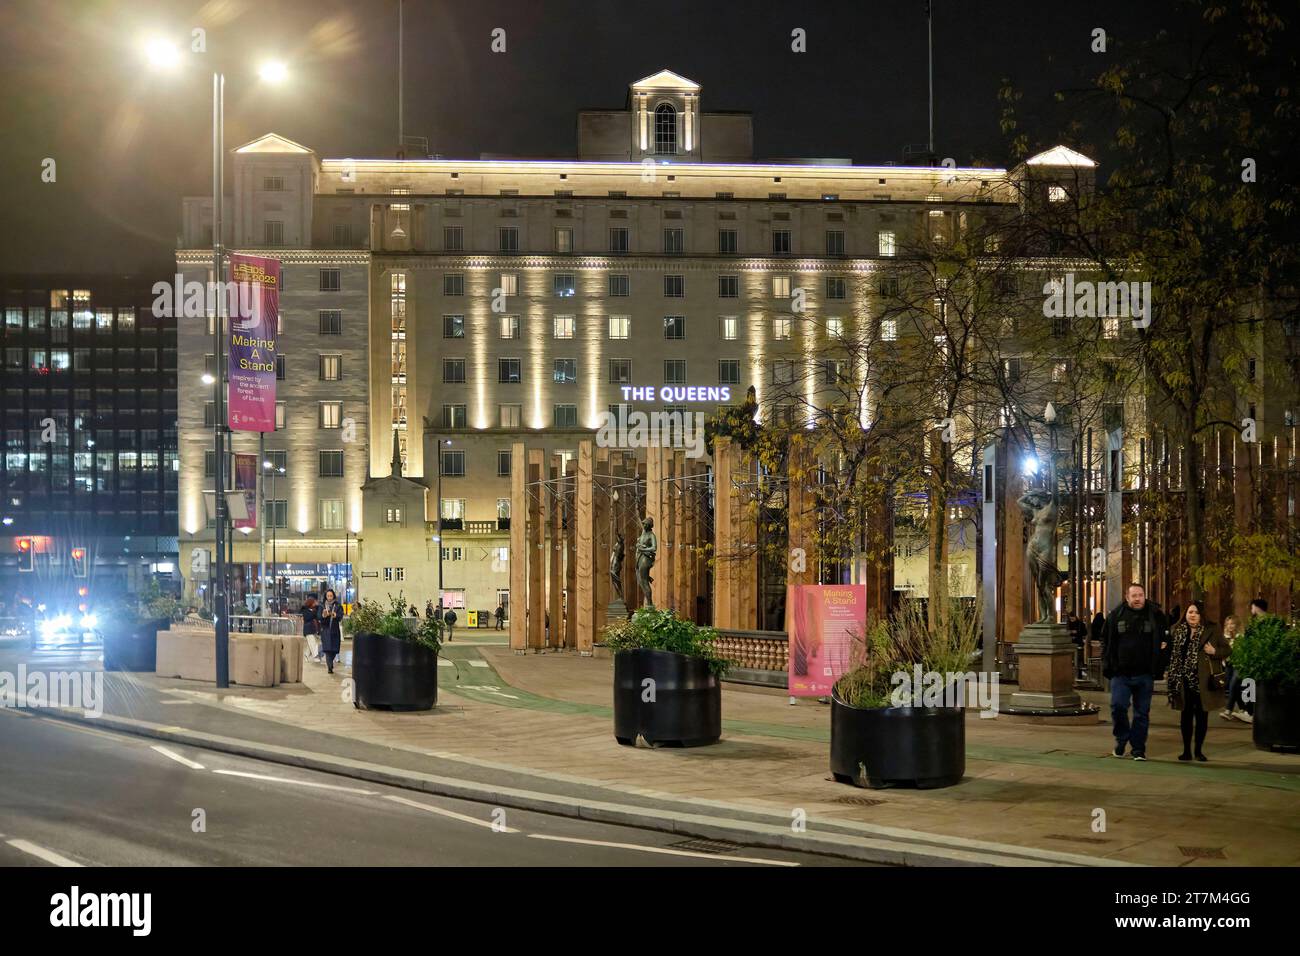 City Square and The Queens Hotel, Leeds city Centre at night, West Yorkshire, Northern England, UK Stock Photo